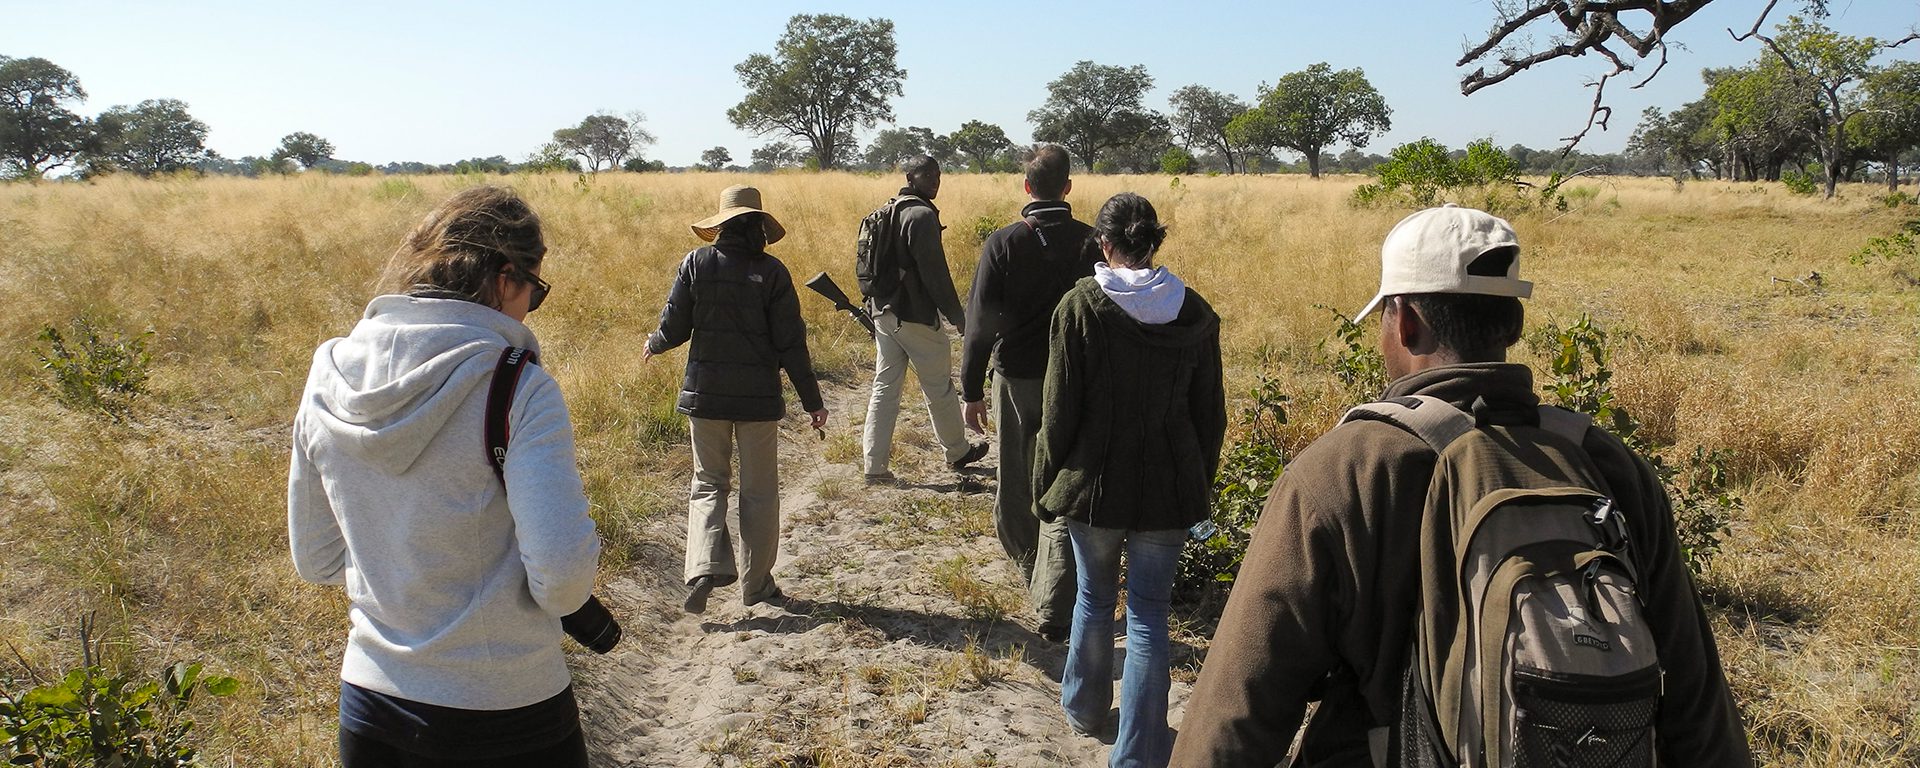 g2a_botswana_getting-in-touch-with-nature-our-walking-safari-2_okavango